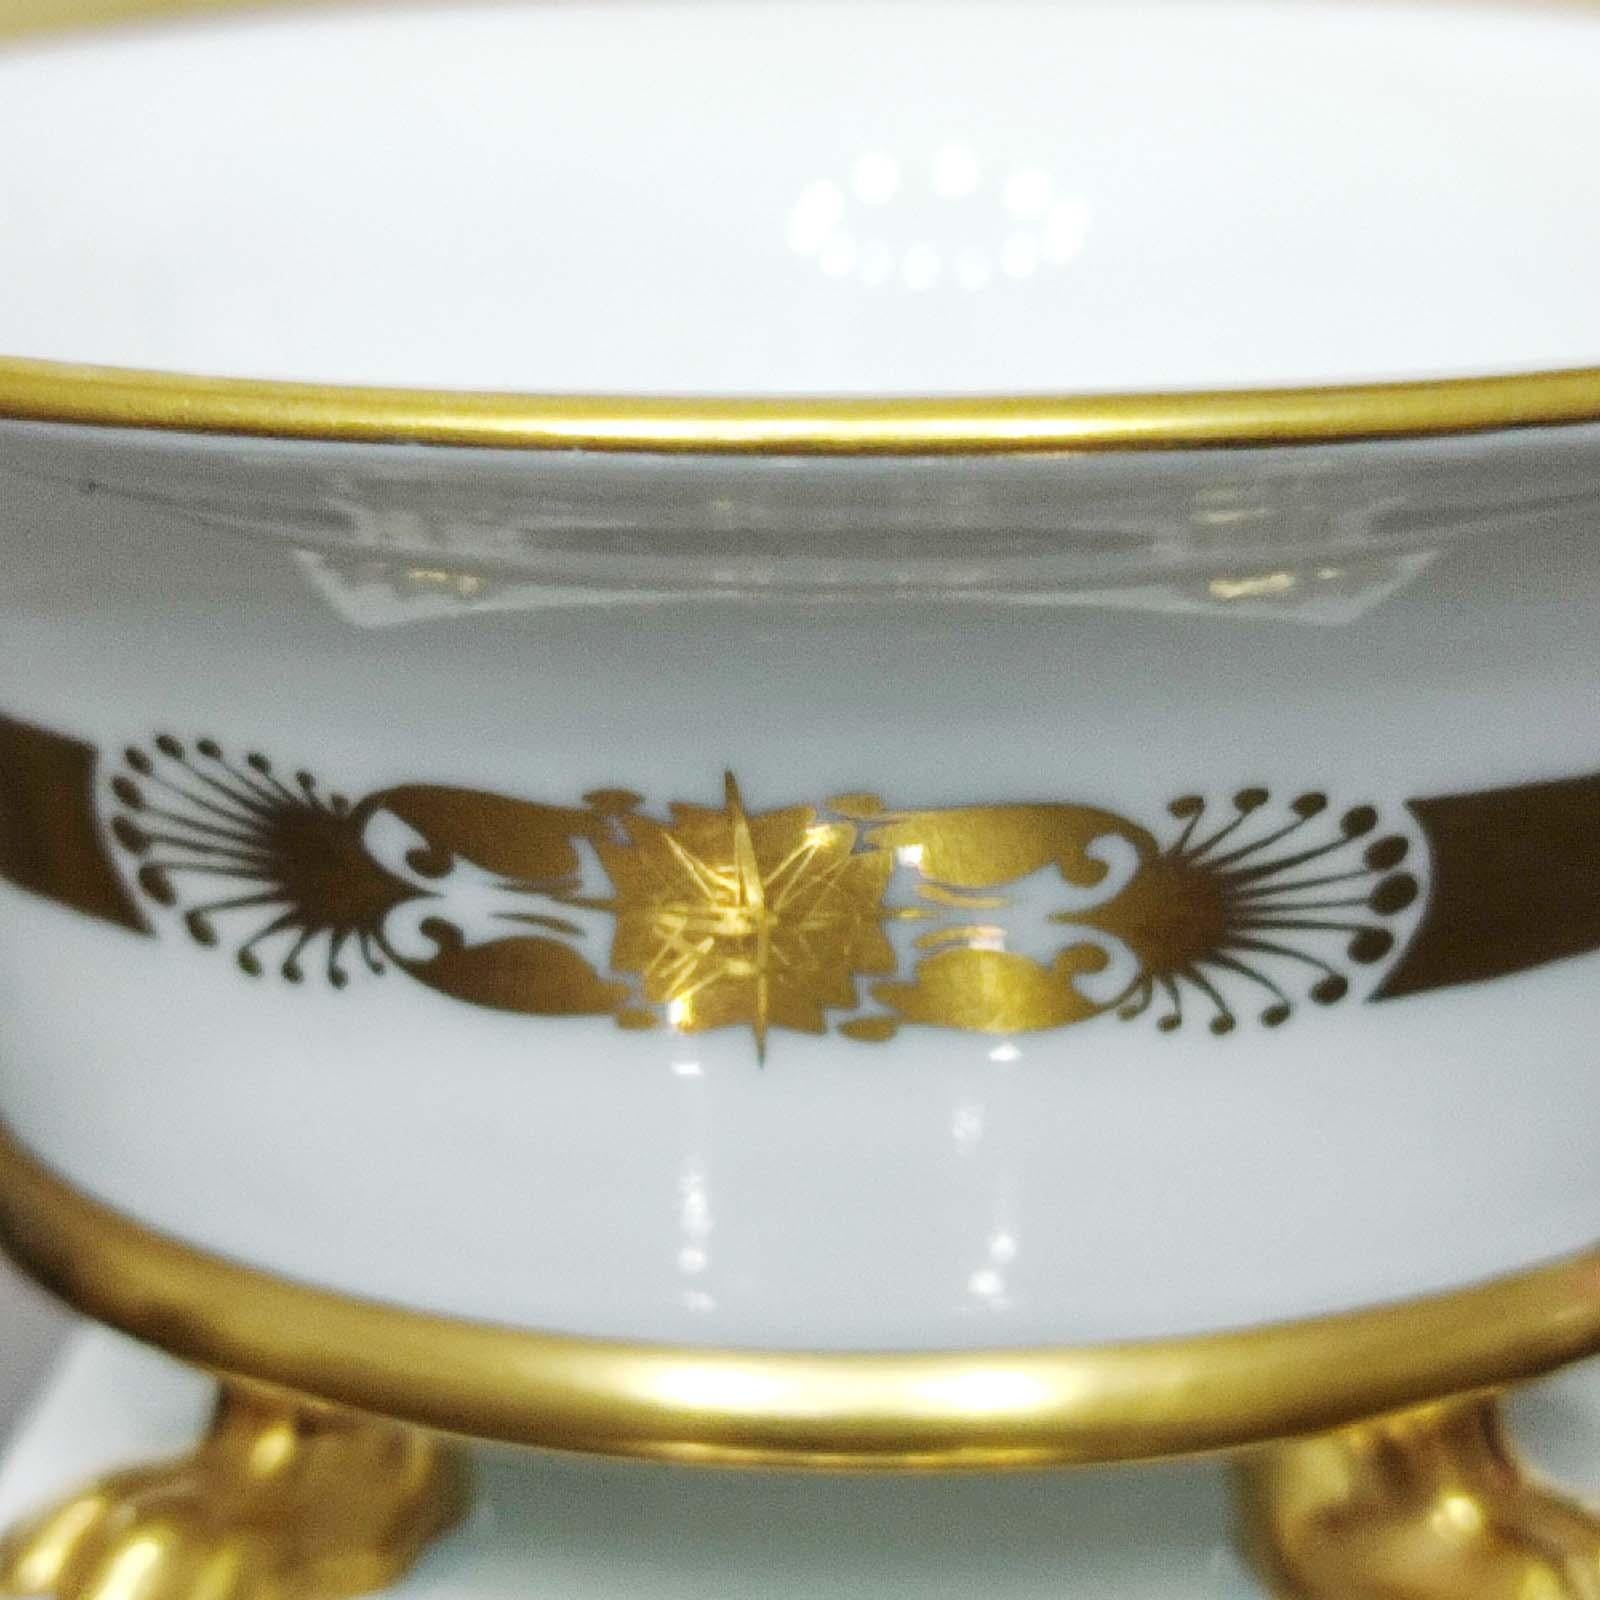 20th Century Herend Hungary Porcelain Small Cache Pot Gold Trim, Claw Footed